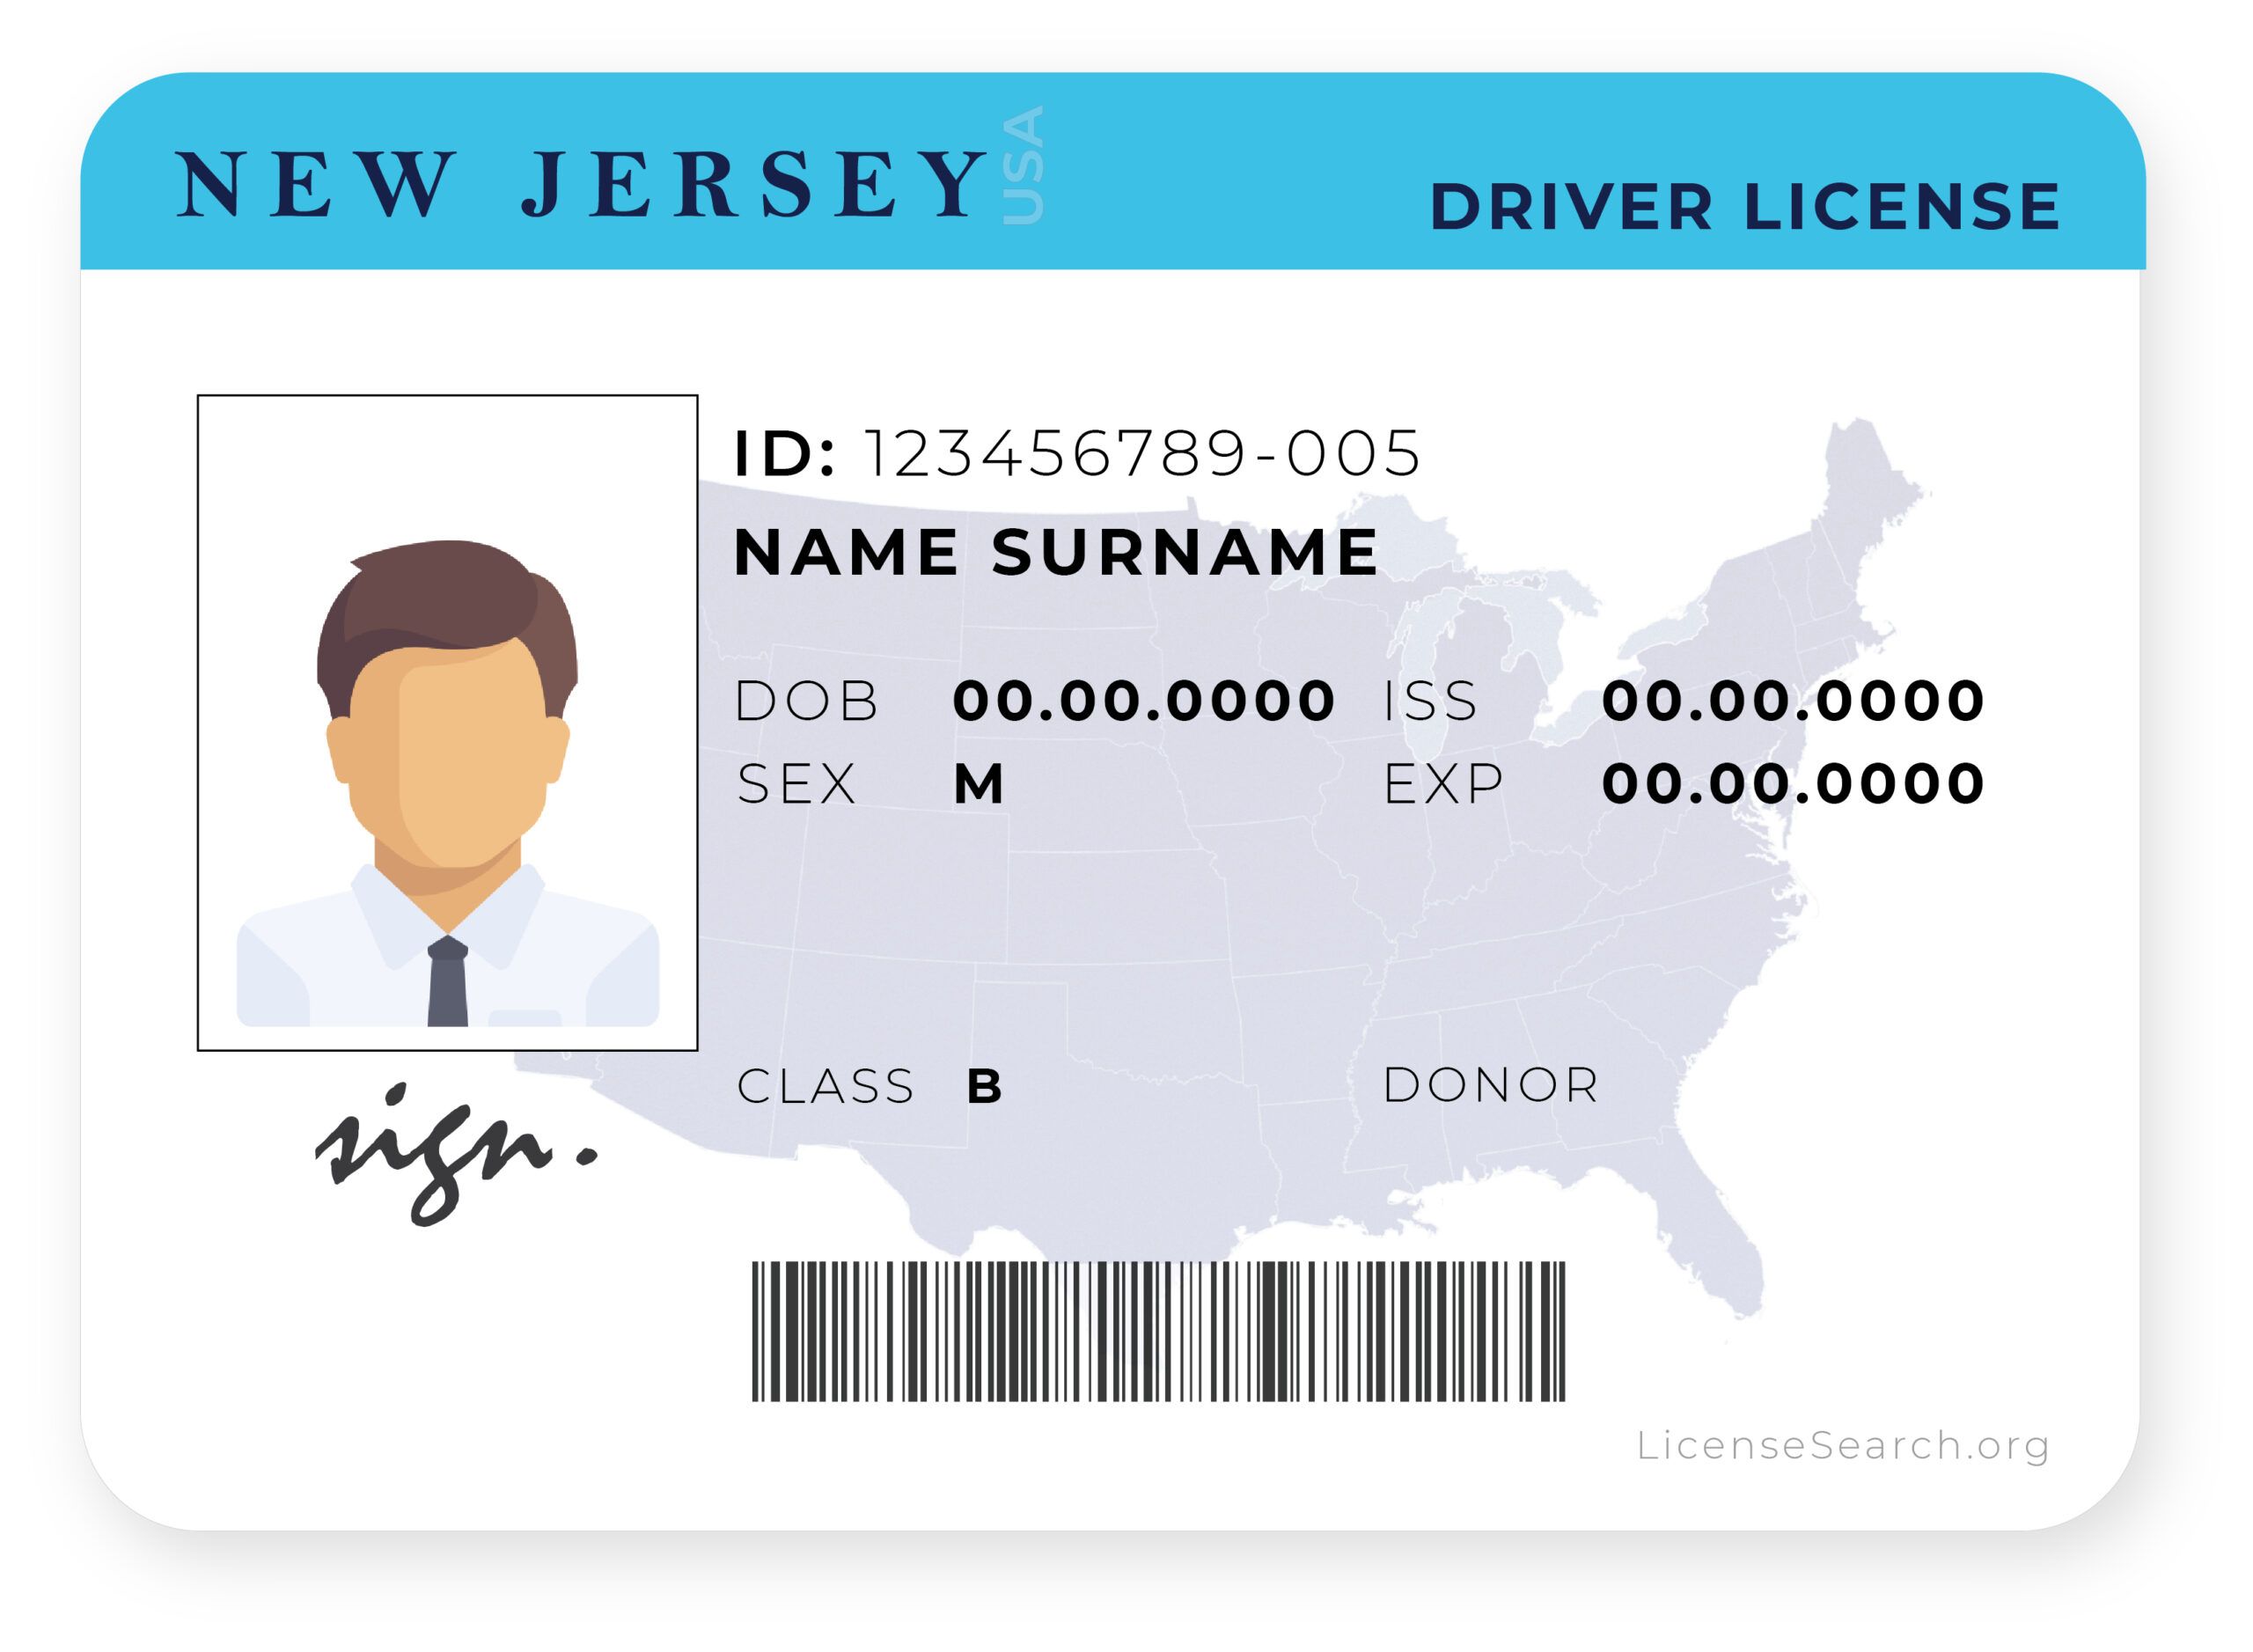 New Jersey Driver License License Lookup